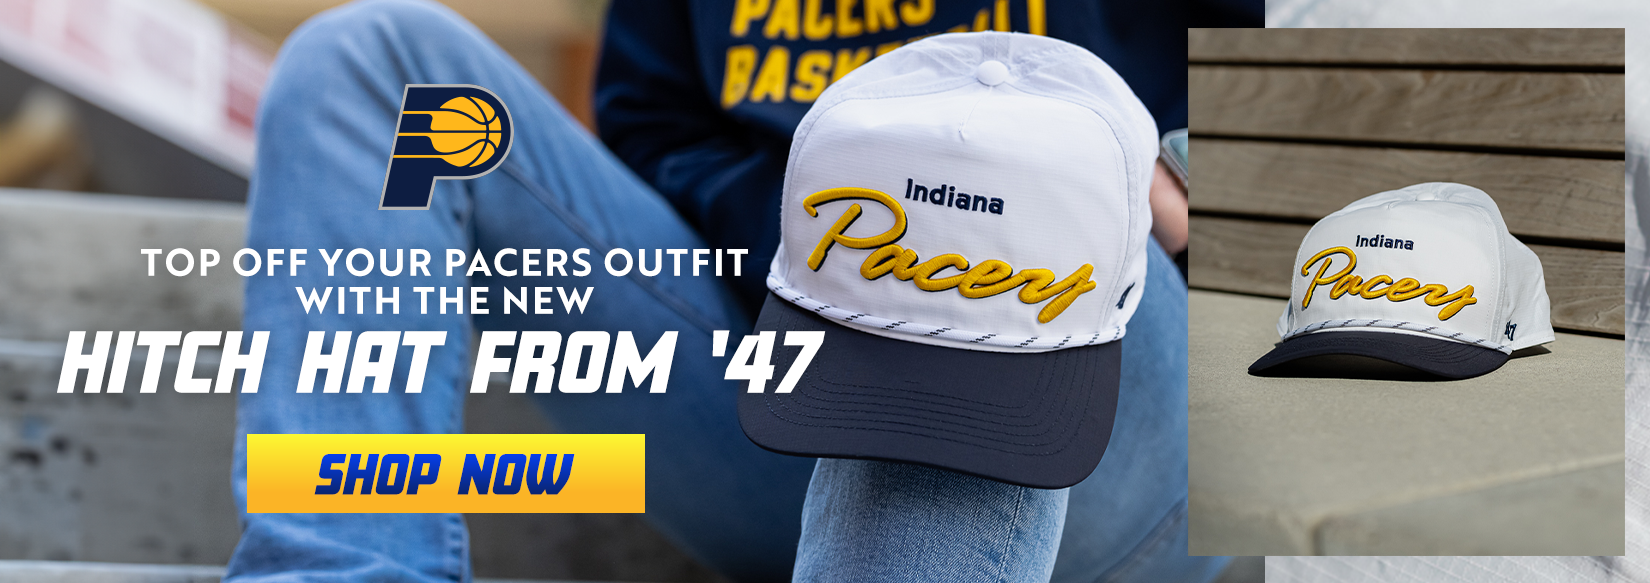 Indiana Pacers merchandise